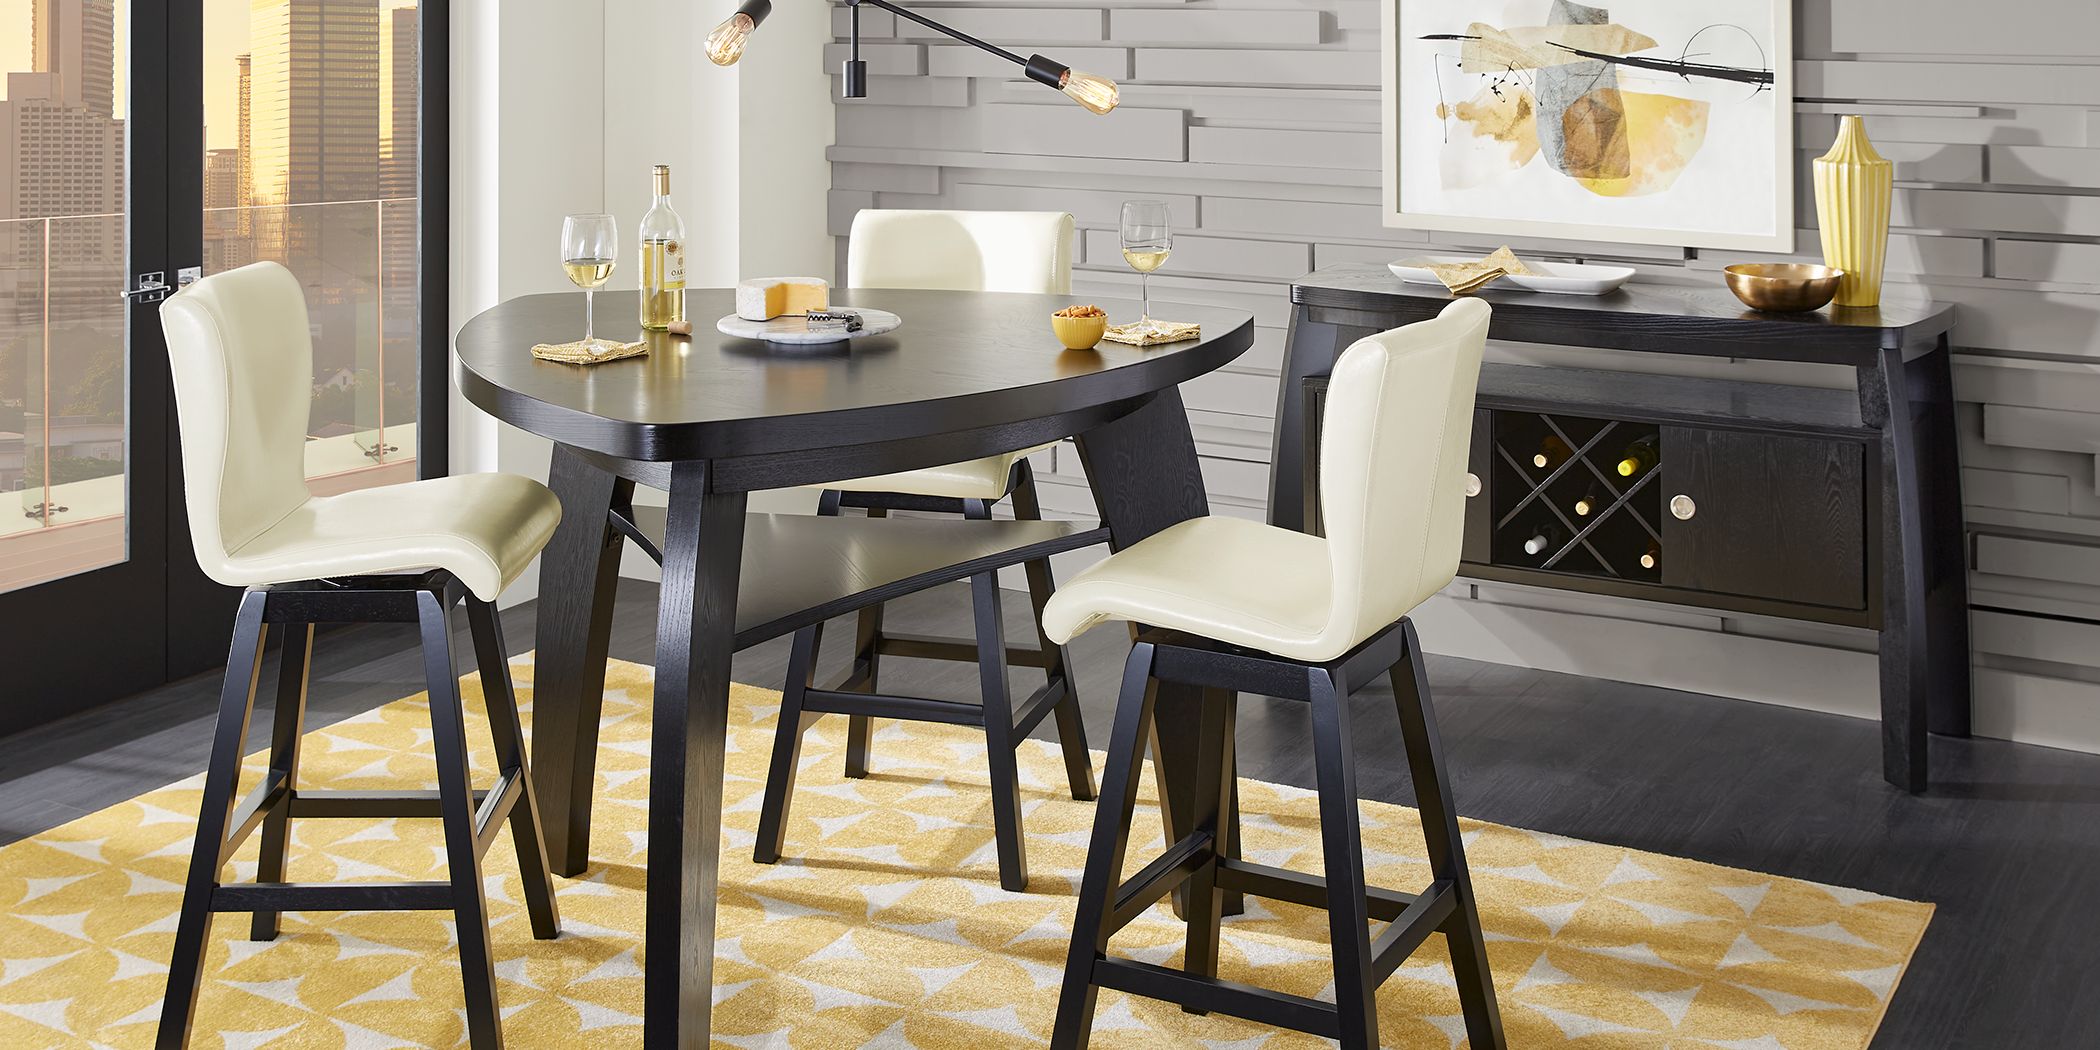 Rooms To Go Noah Dining Room Set